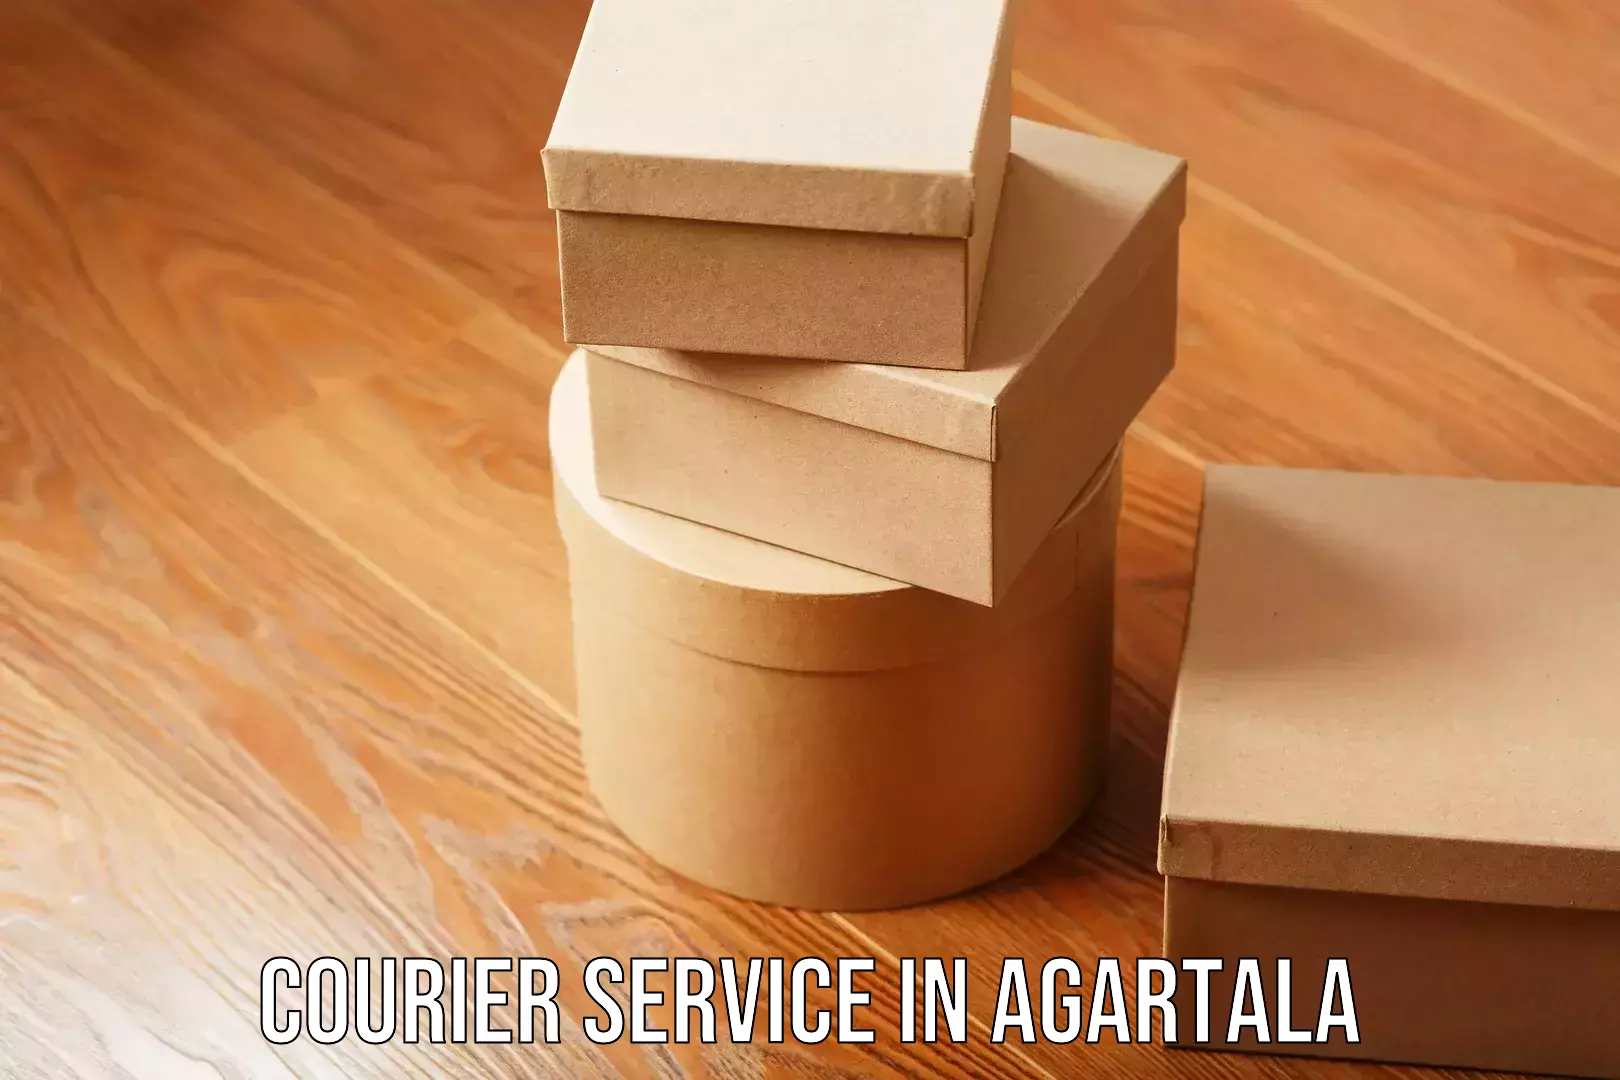 Customer-friendly courier services in Agartala